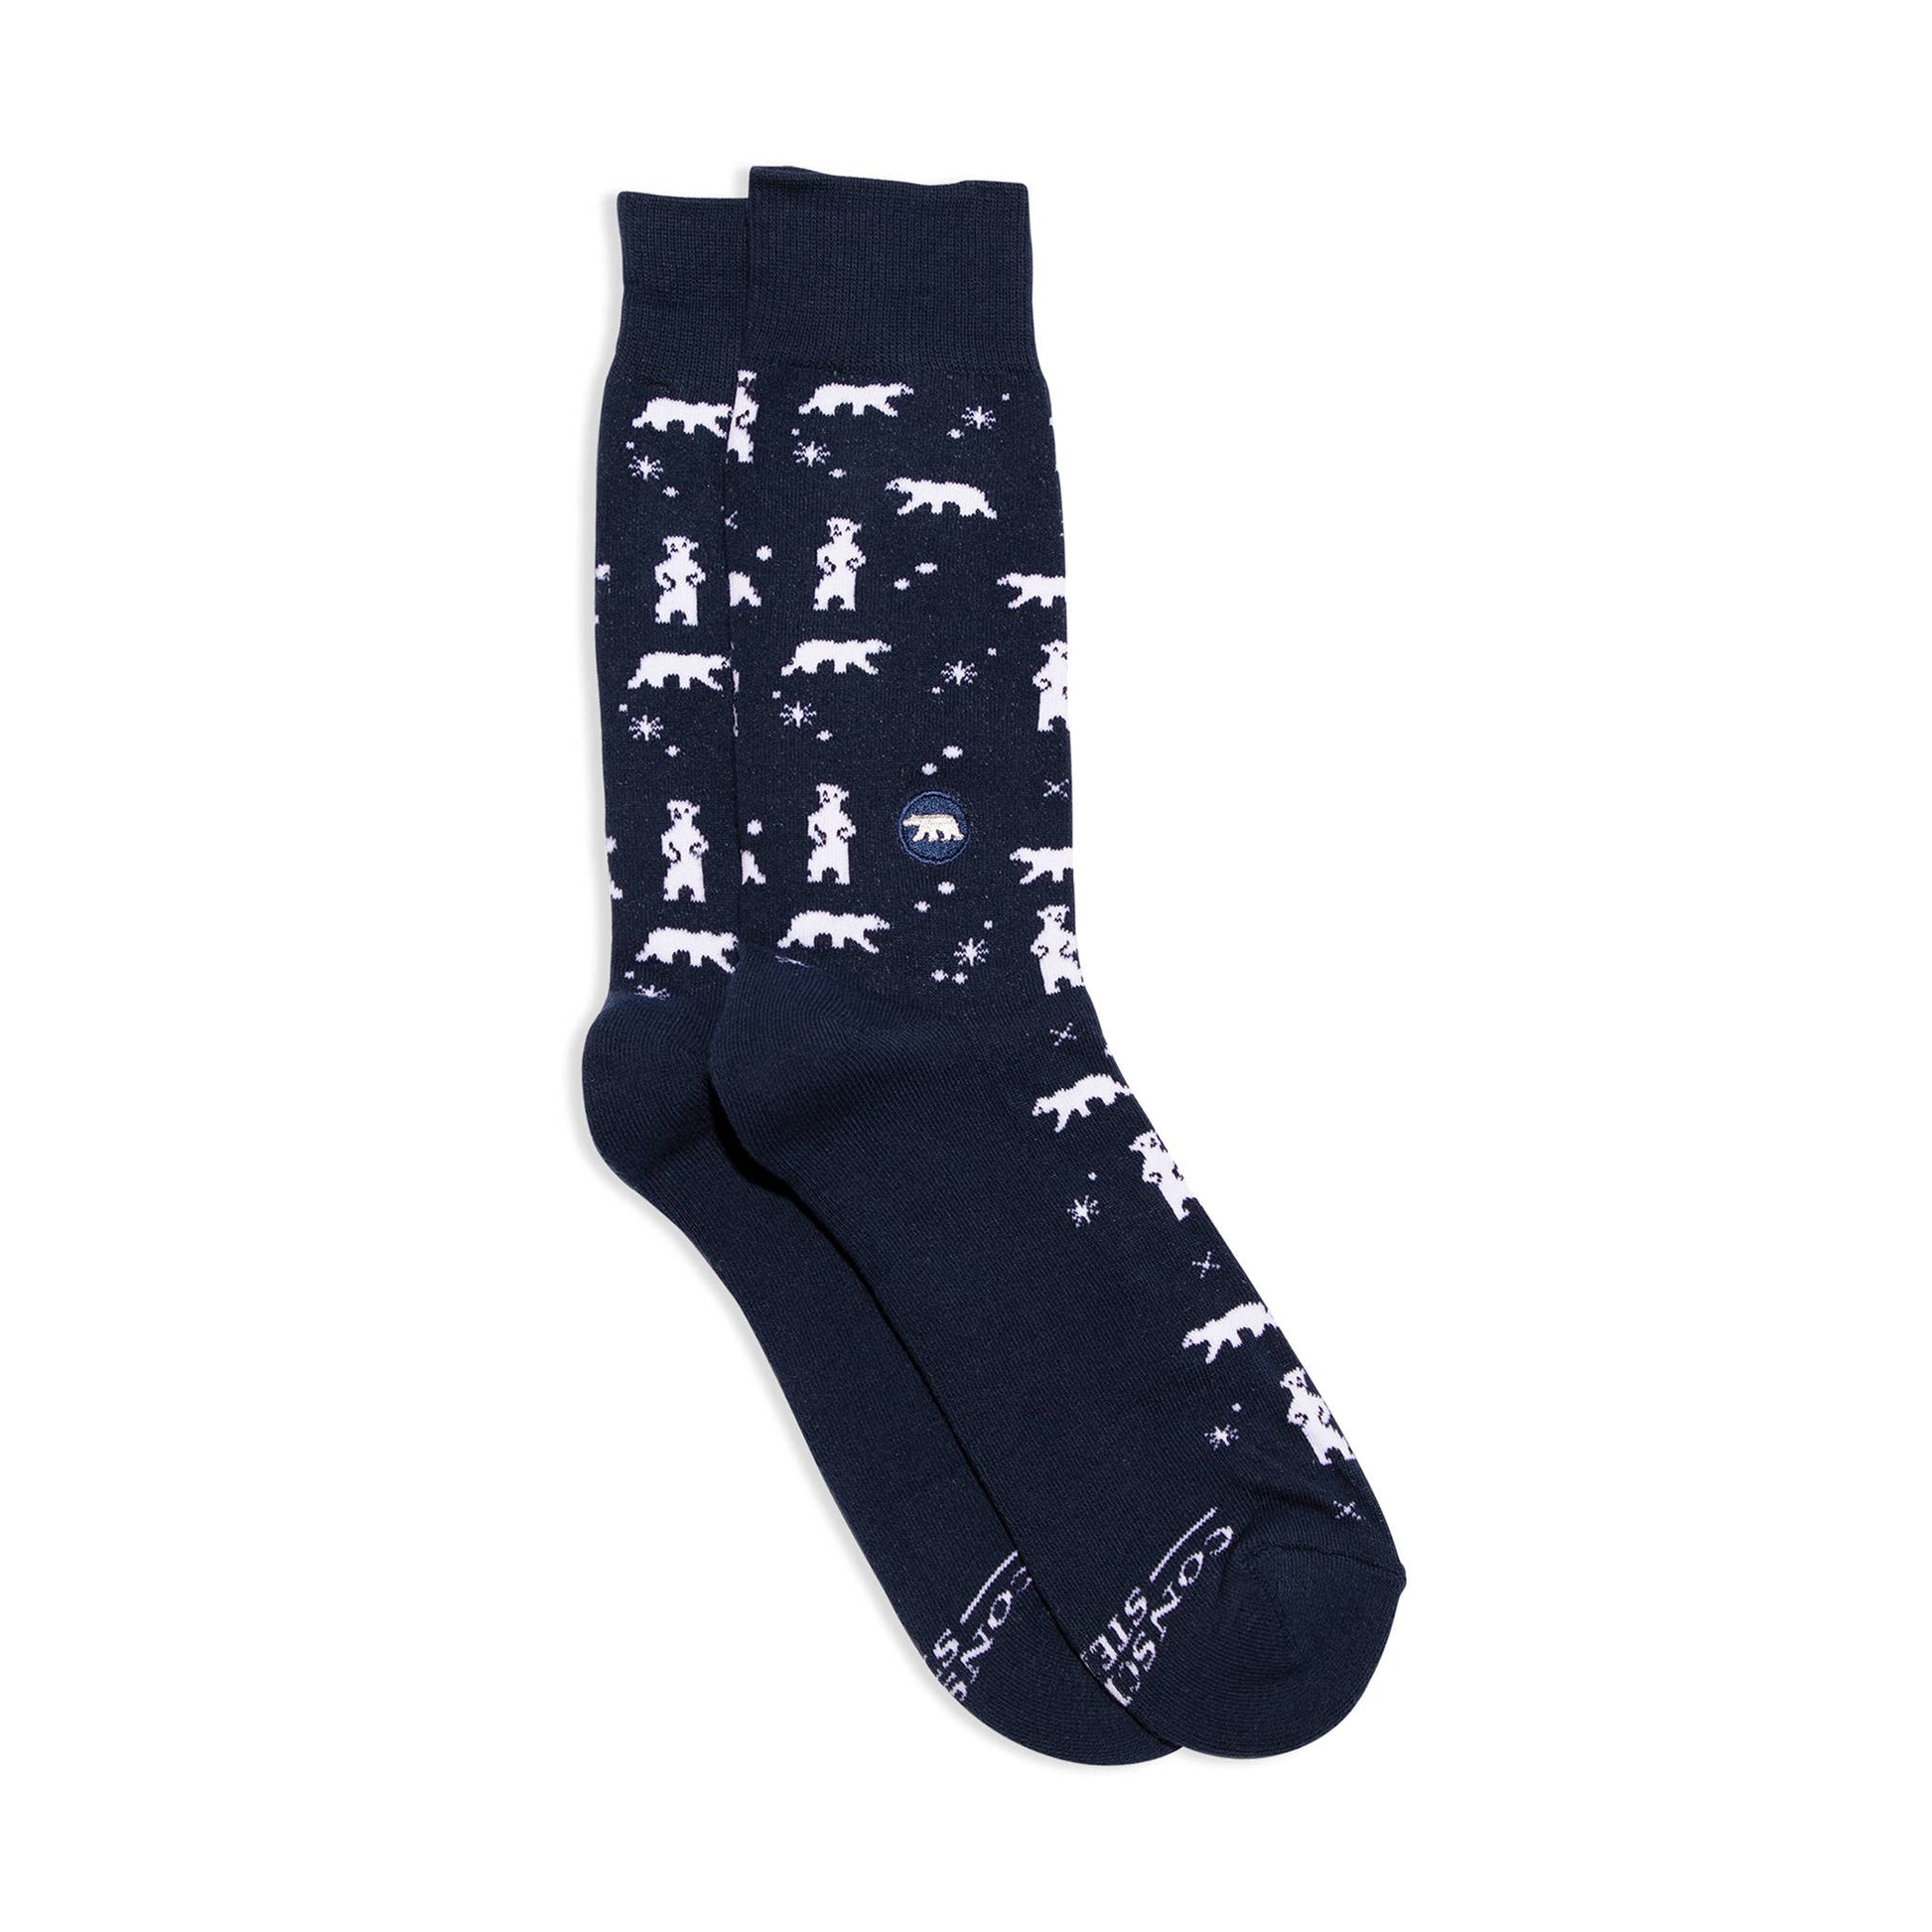 Conscious Step - Socks that Protect Polar Bears  Conscious Step Small  -better made easy-eco-friendly-sustainable-gifting